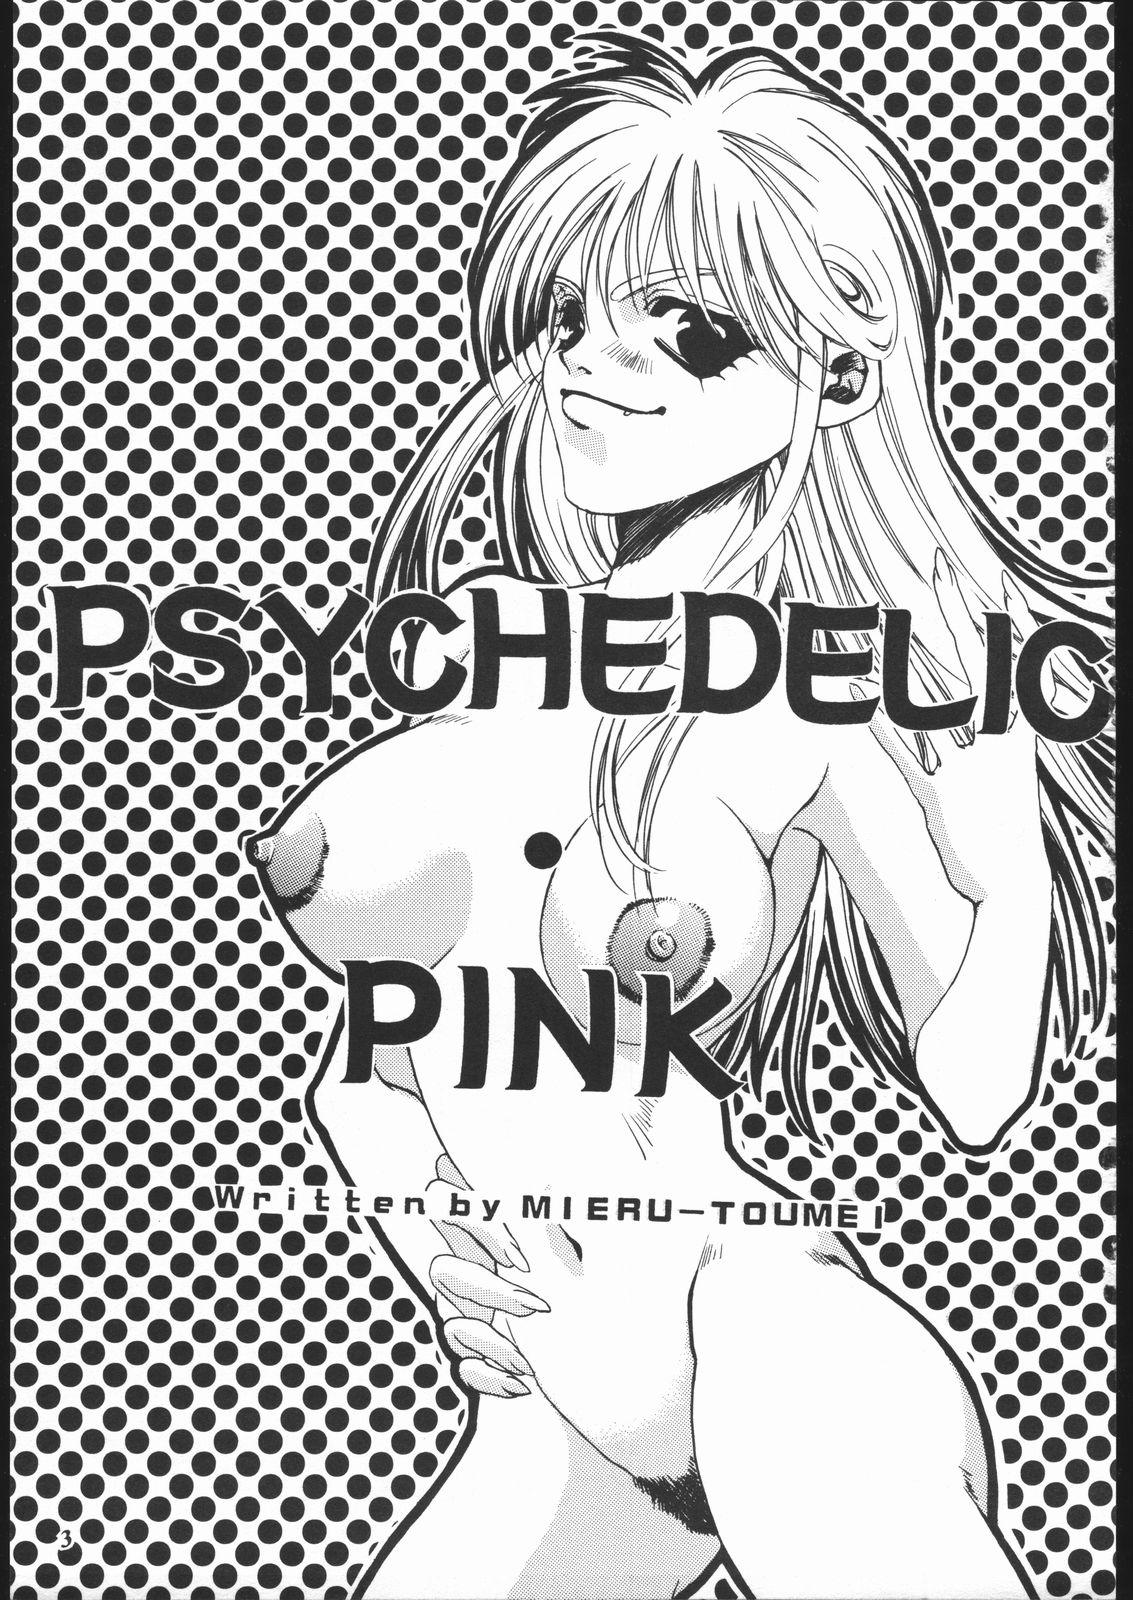 Ass Lick Psychedelic Pink - Cardcaptor sakura To heart Slayers Sorcerous stabber orphen Hardcore Porn - Page 2